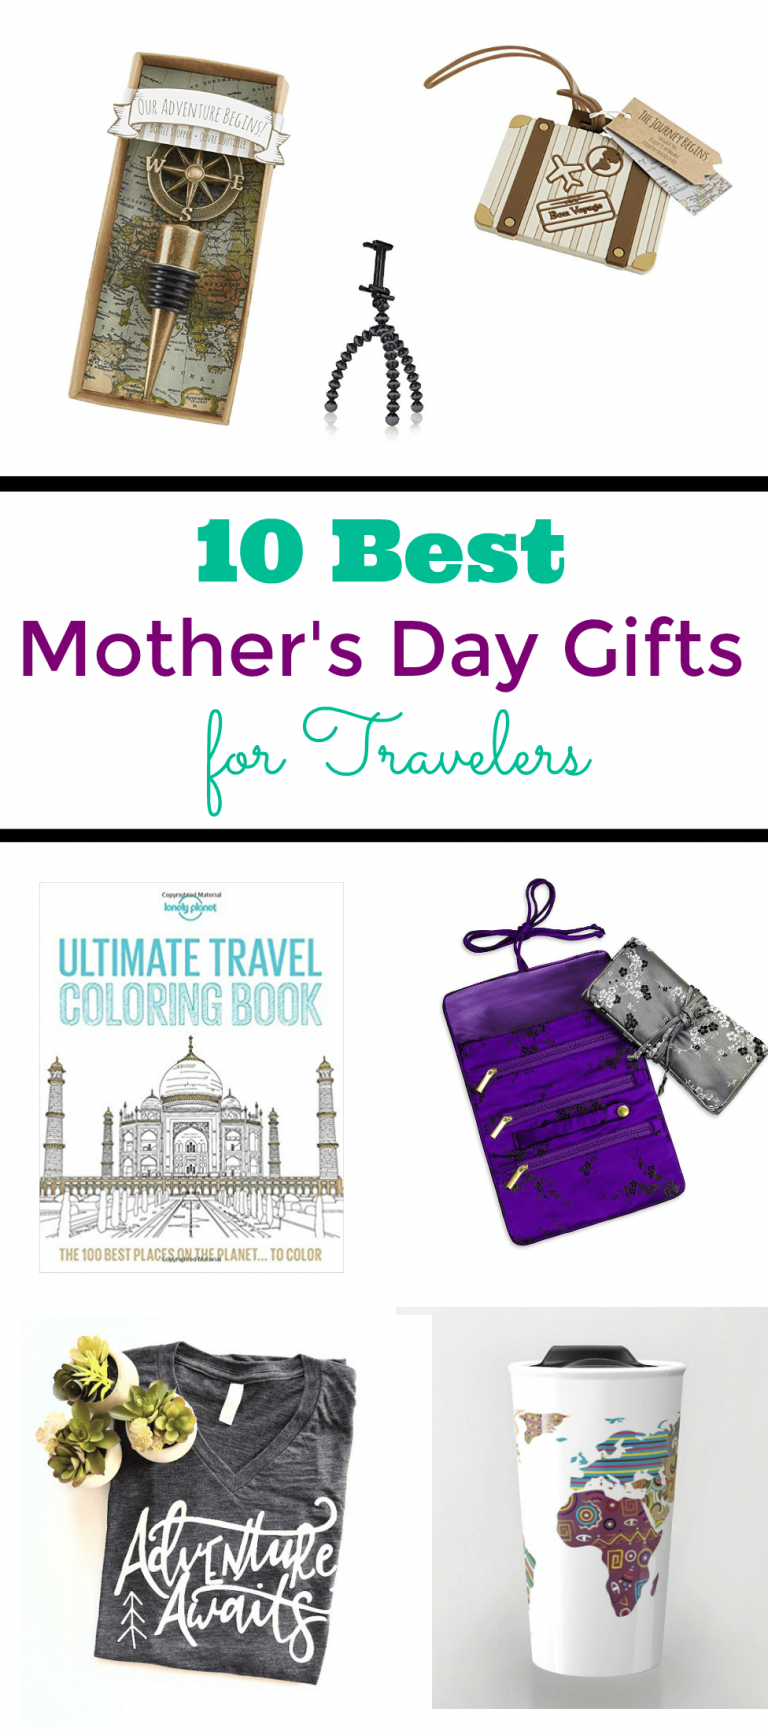 World's Best Mother's Day Gifts for Travelers Something for all Budgets